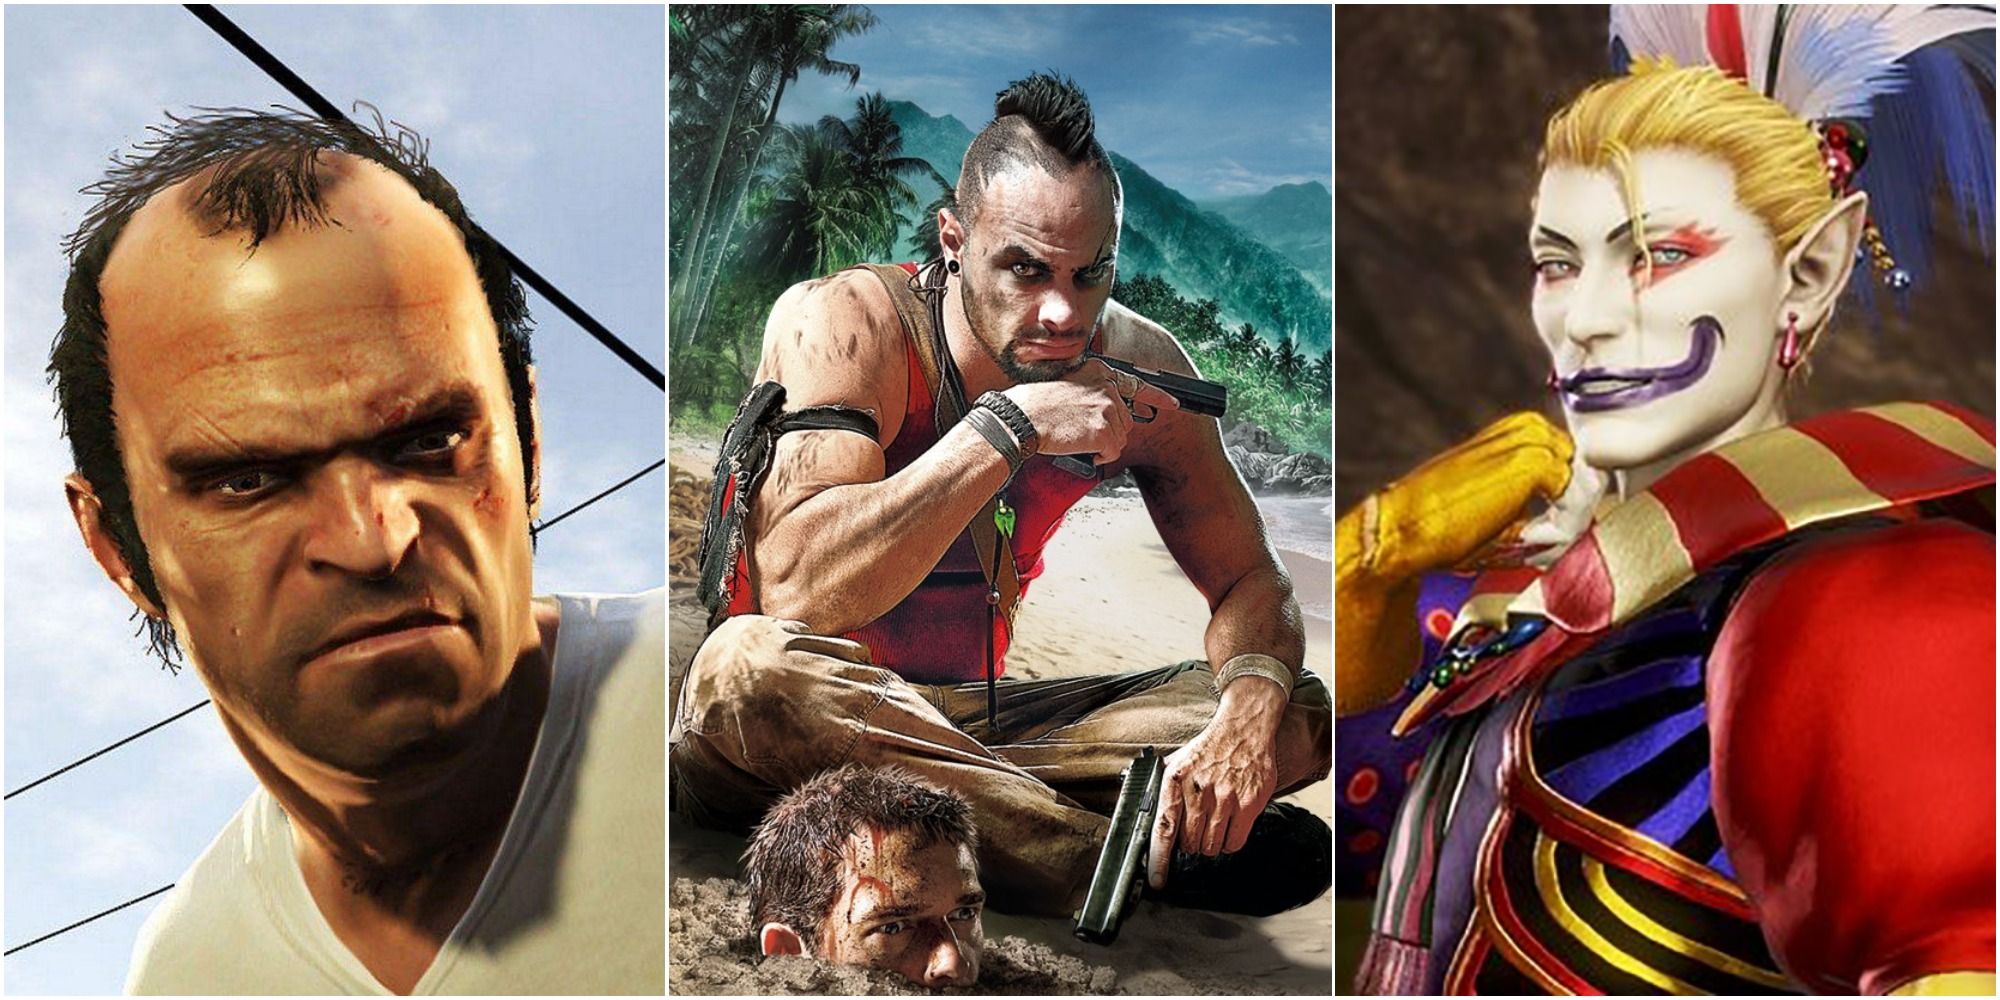 Characters You Wouldn't Invite Over Featured - Trevor Philips, Kefka, Vaas Montenegro